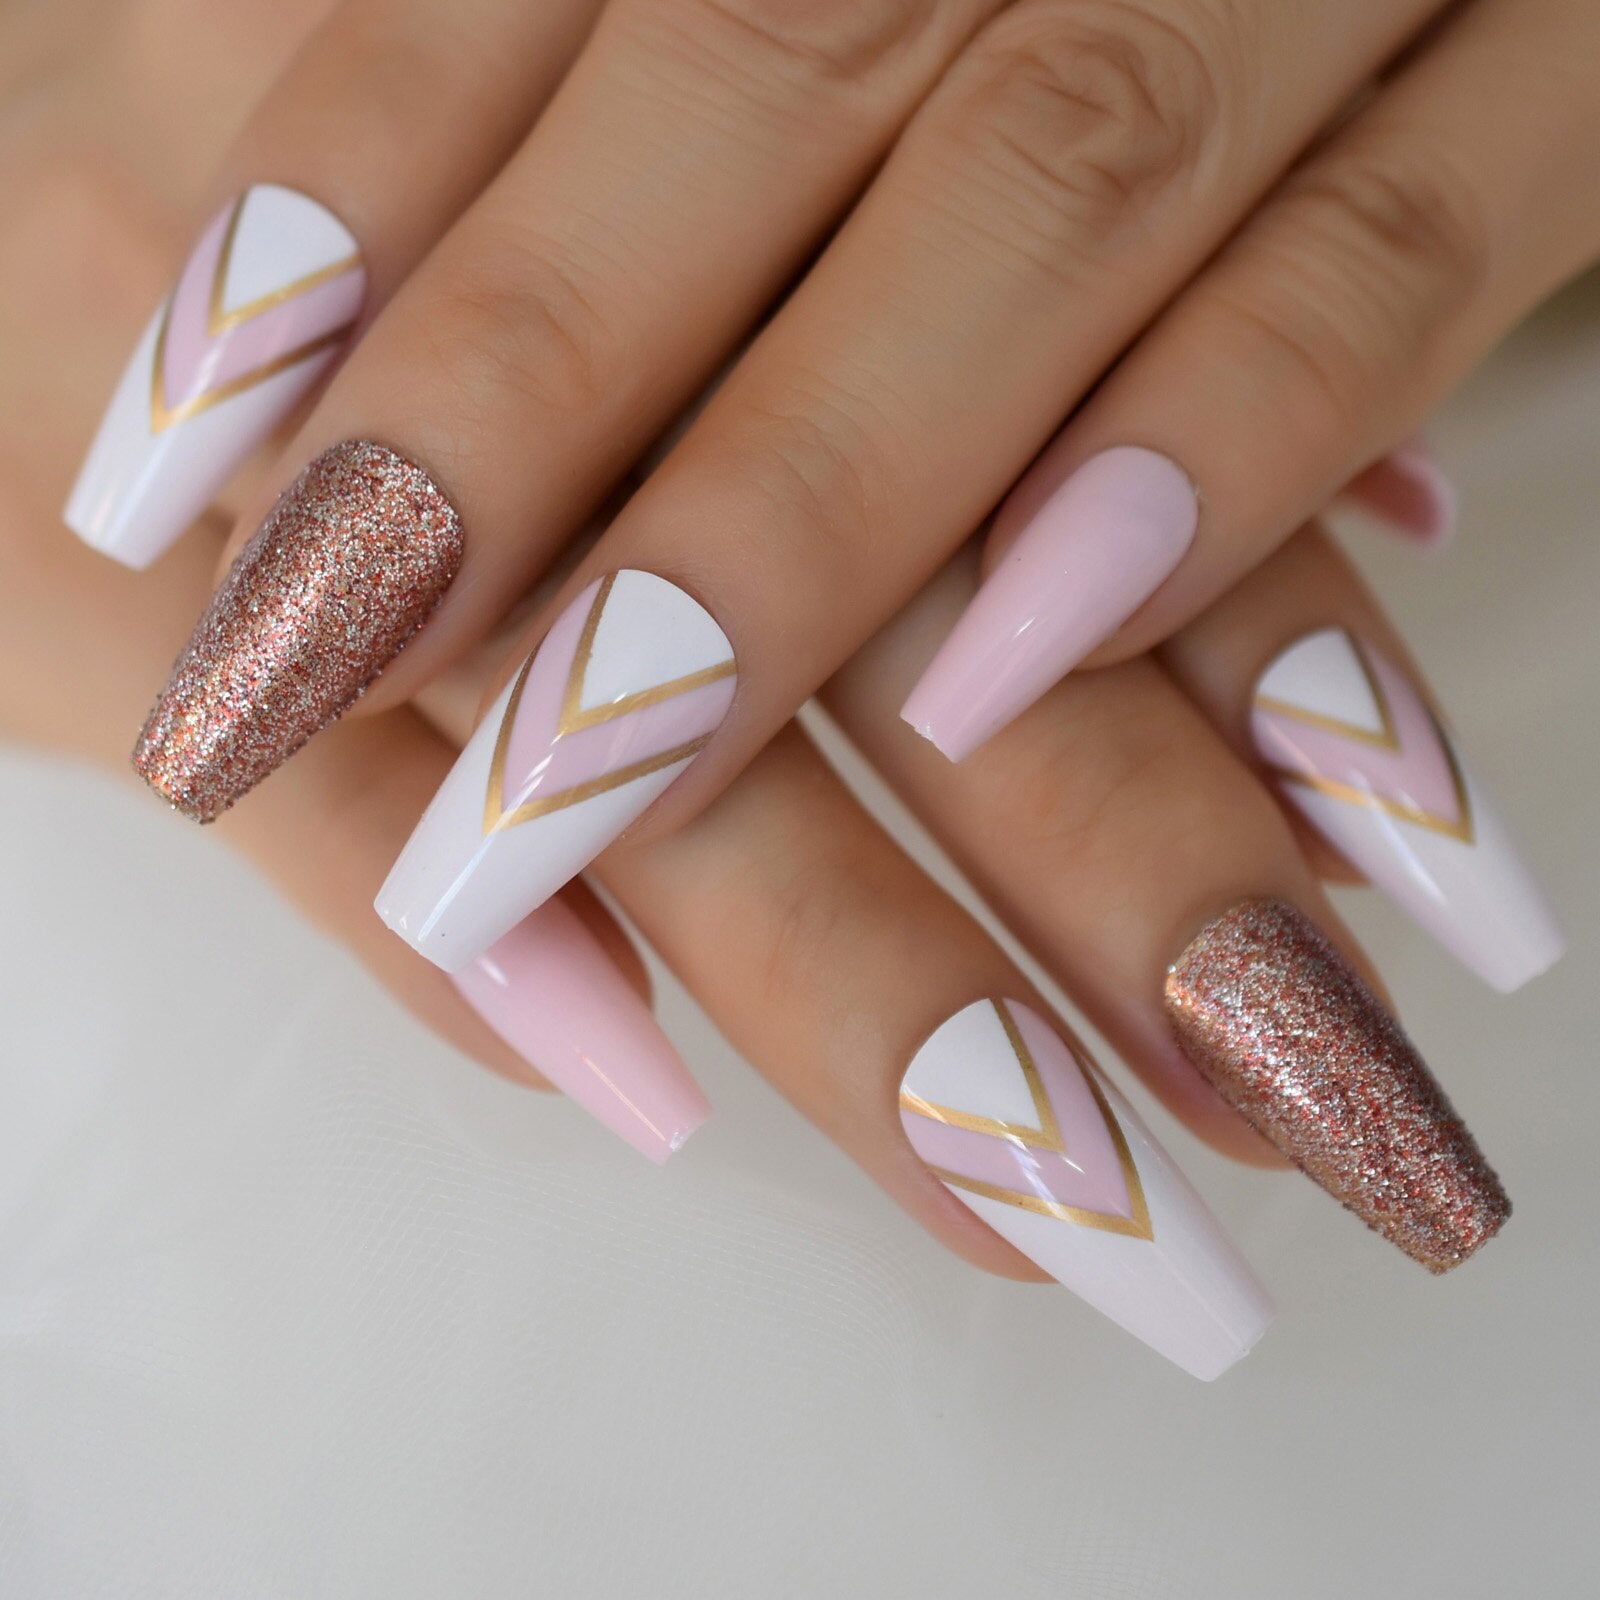 Top Beauty Parlours For Nail Extension in Mulund West - Best Beauty Parlors  For Acrylic Nail Extension Mumbai - Justdial